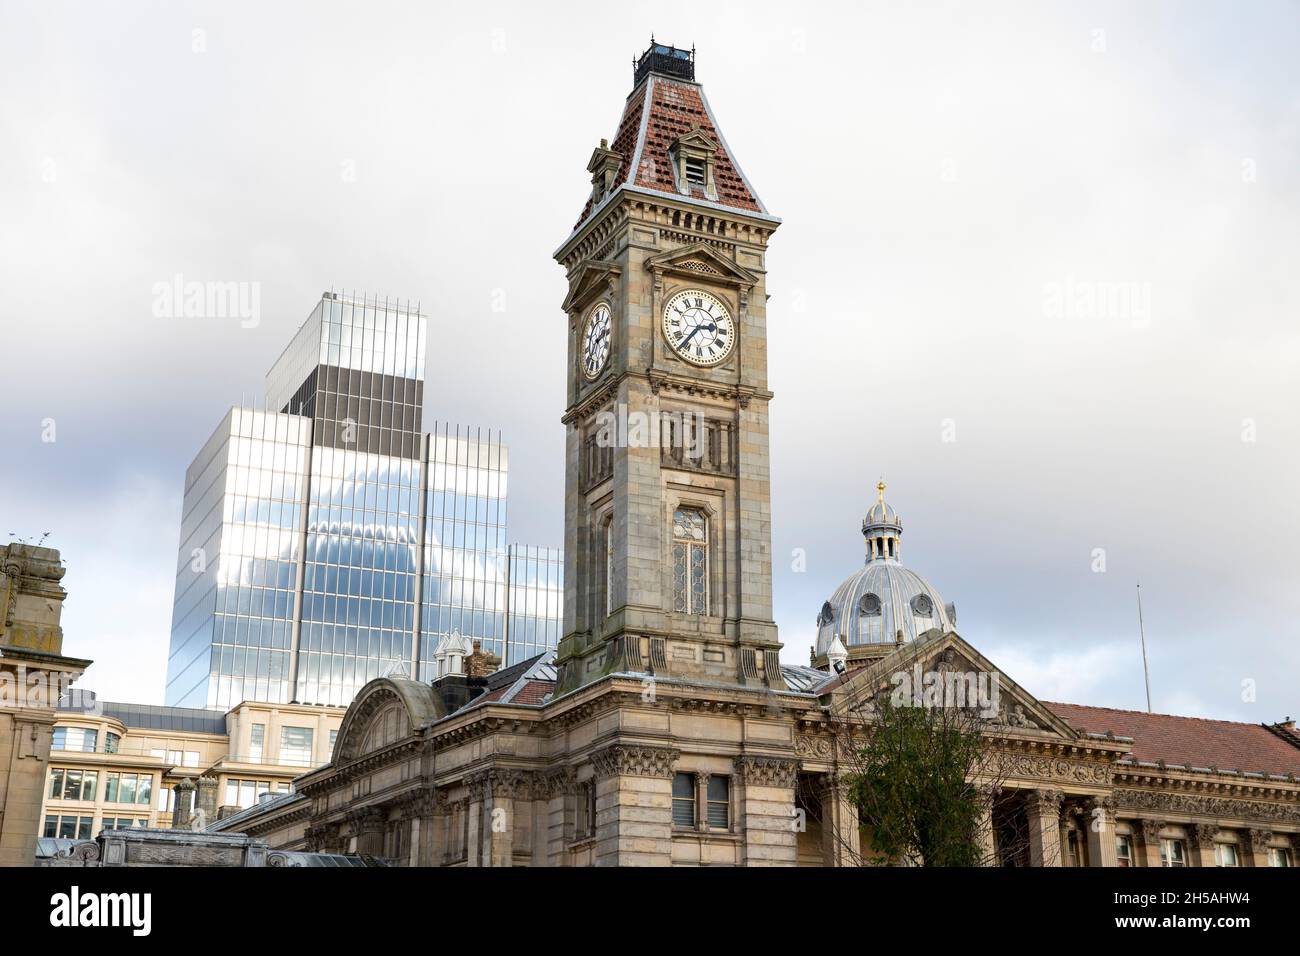 The almost complete 103 Colmore Row building pictured behind behind the Birmingham Museum and art gallery clock in Chamberlain Square. Stock Photo